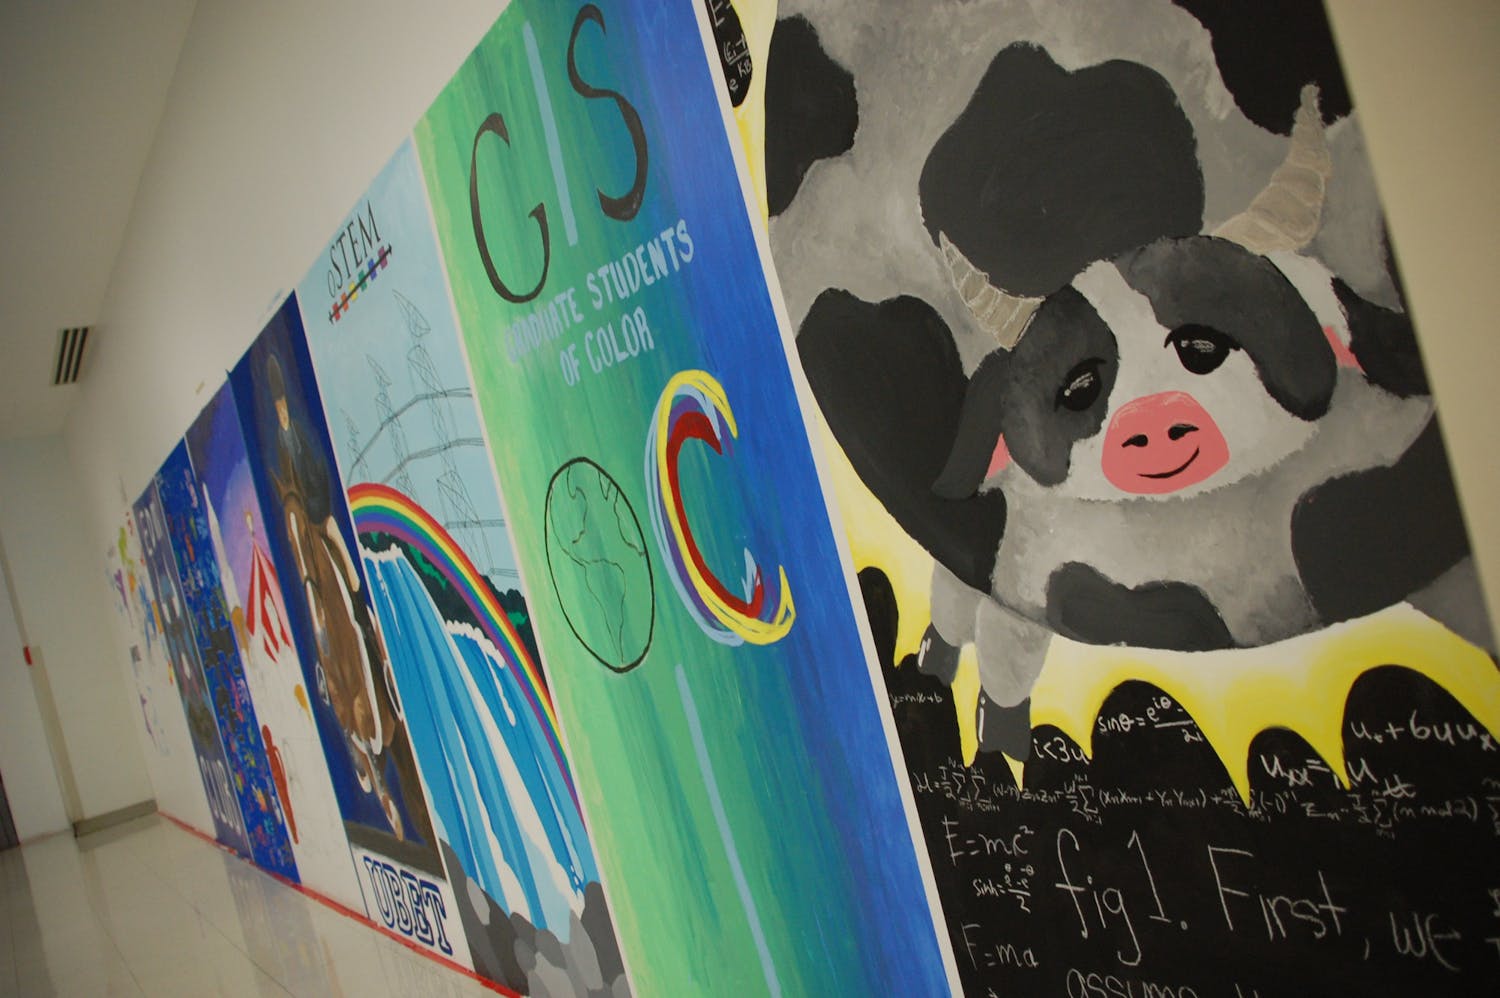 The mural painting competition was held to “infuse UB pride and spirit back into the Student Union” during renovations.&nbsp;